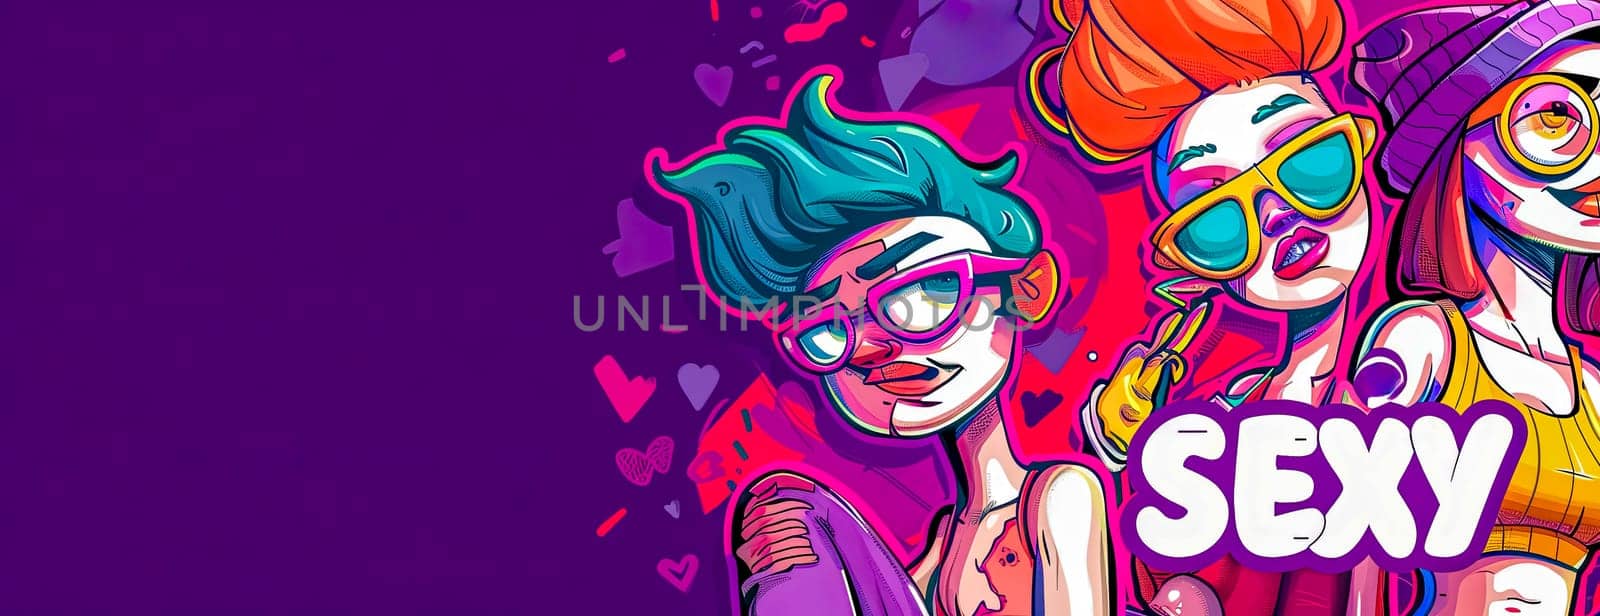 Vibrant pop art illustration featuring stylish young women with bold makeup and sunglasses